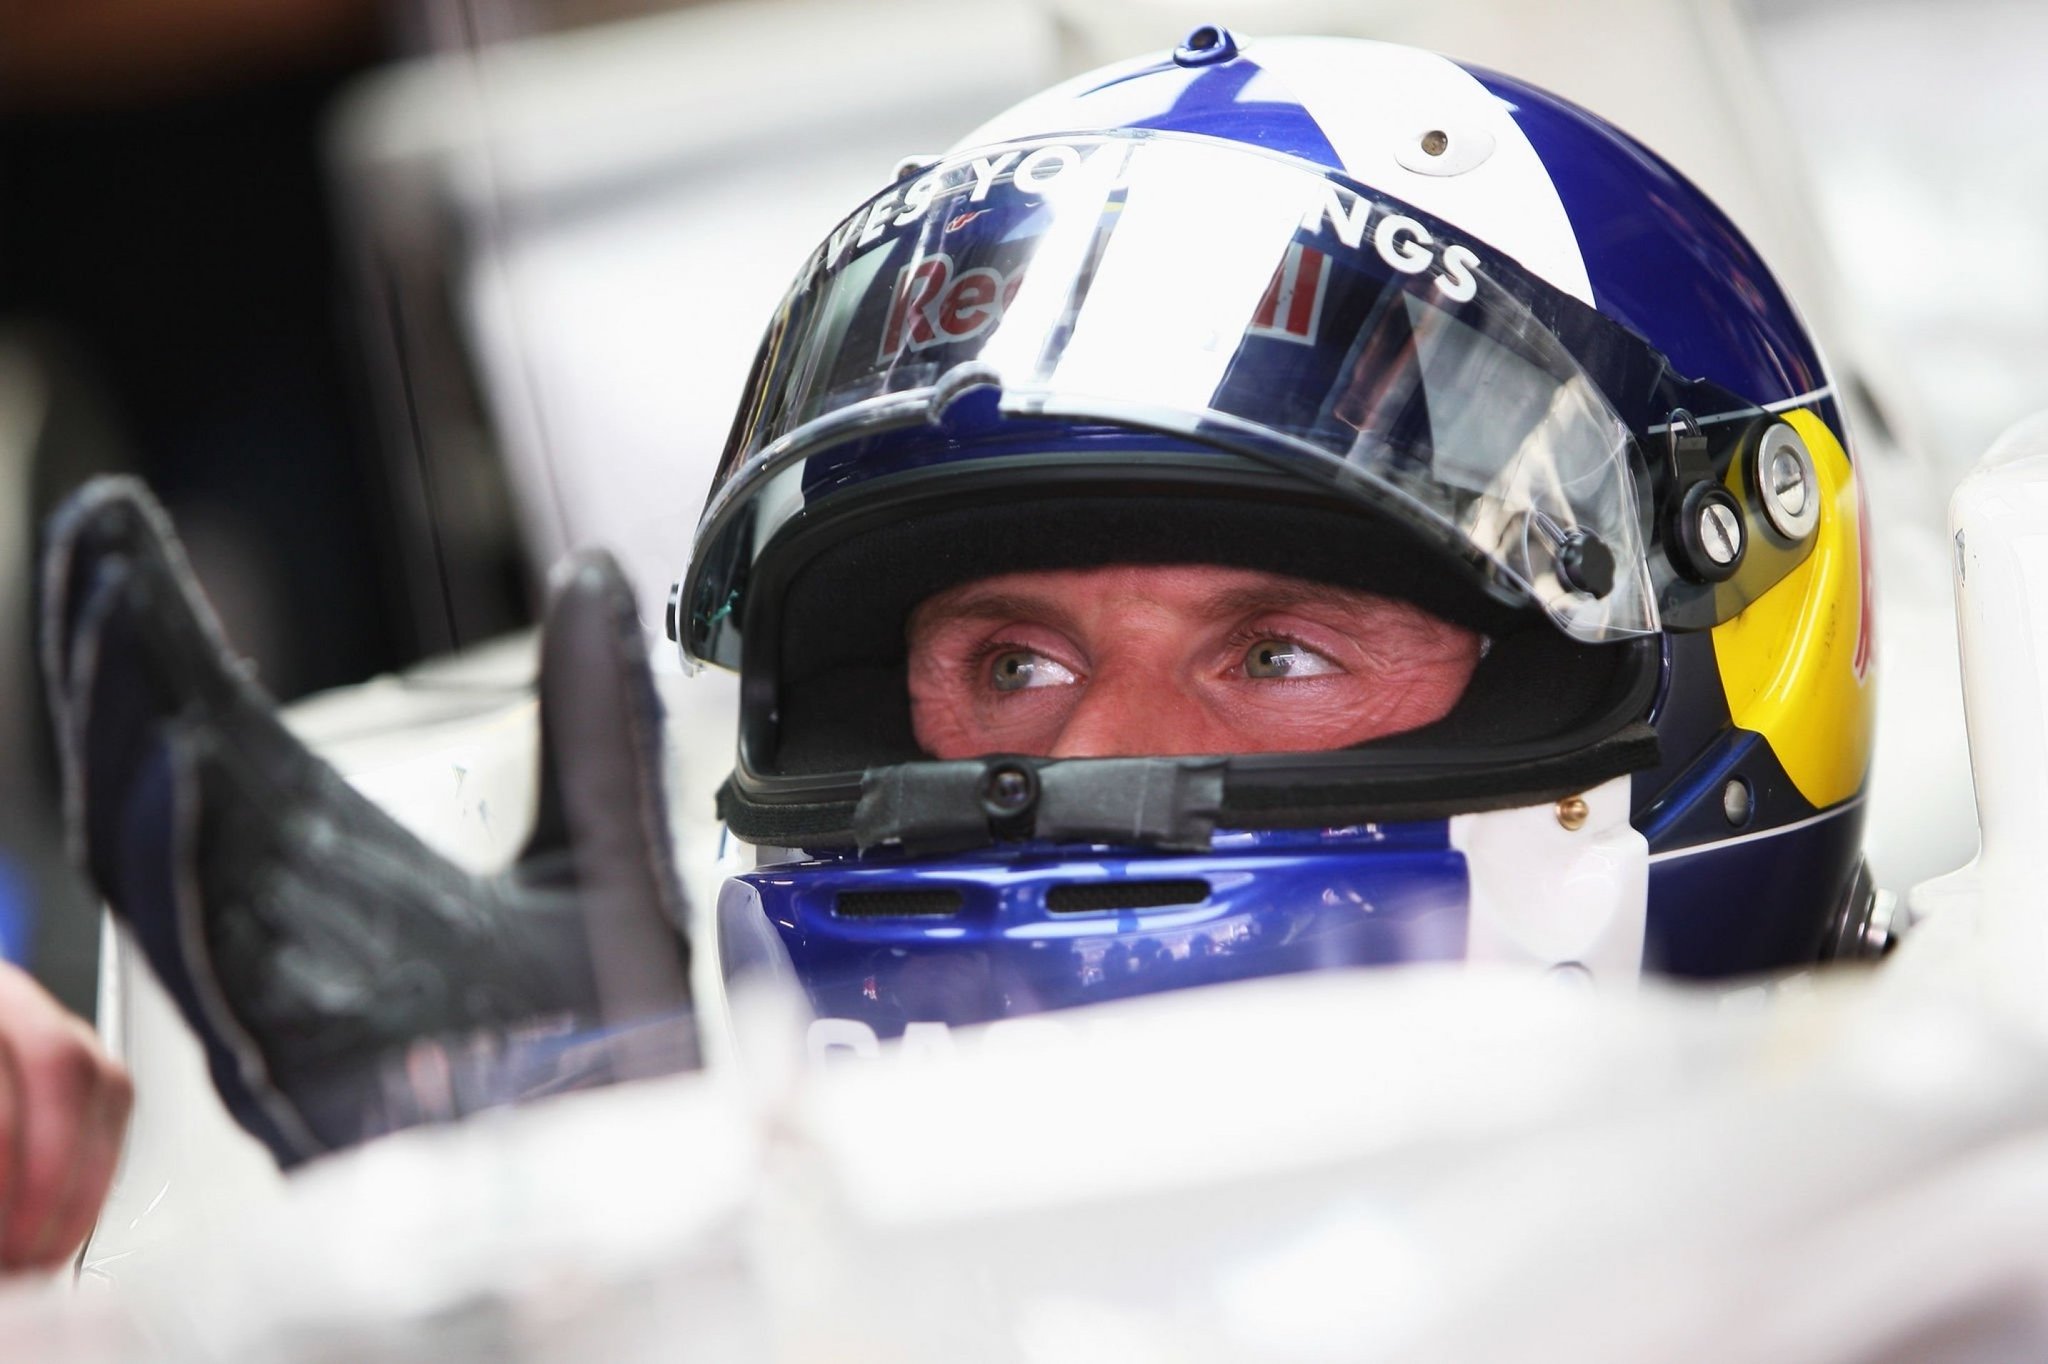 Wishing a truly happy birthday to David Coulthard! 